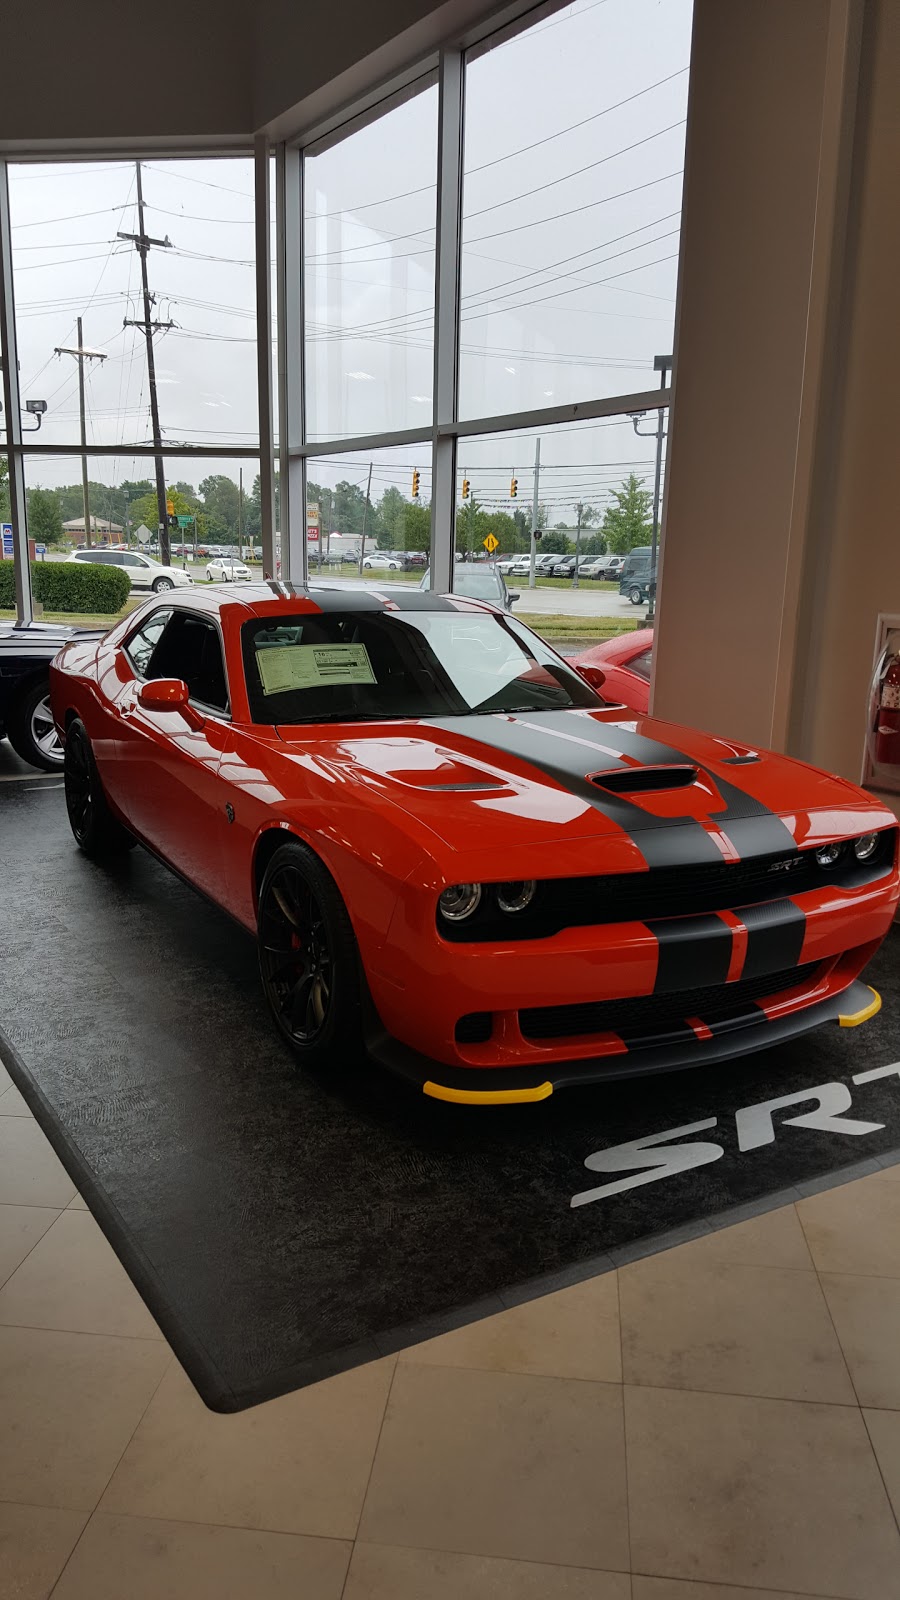 LaFontaine Chrysler Dodge Jeep Ram of Walled Lake | 1111 S Commerce Rd, Walled Lake, MI 48390, USA | Phone: (248) 560-6367